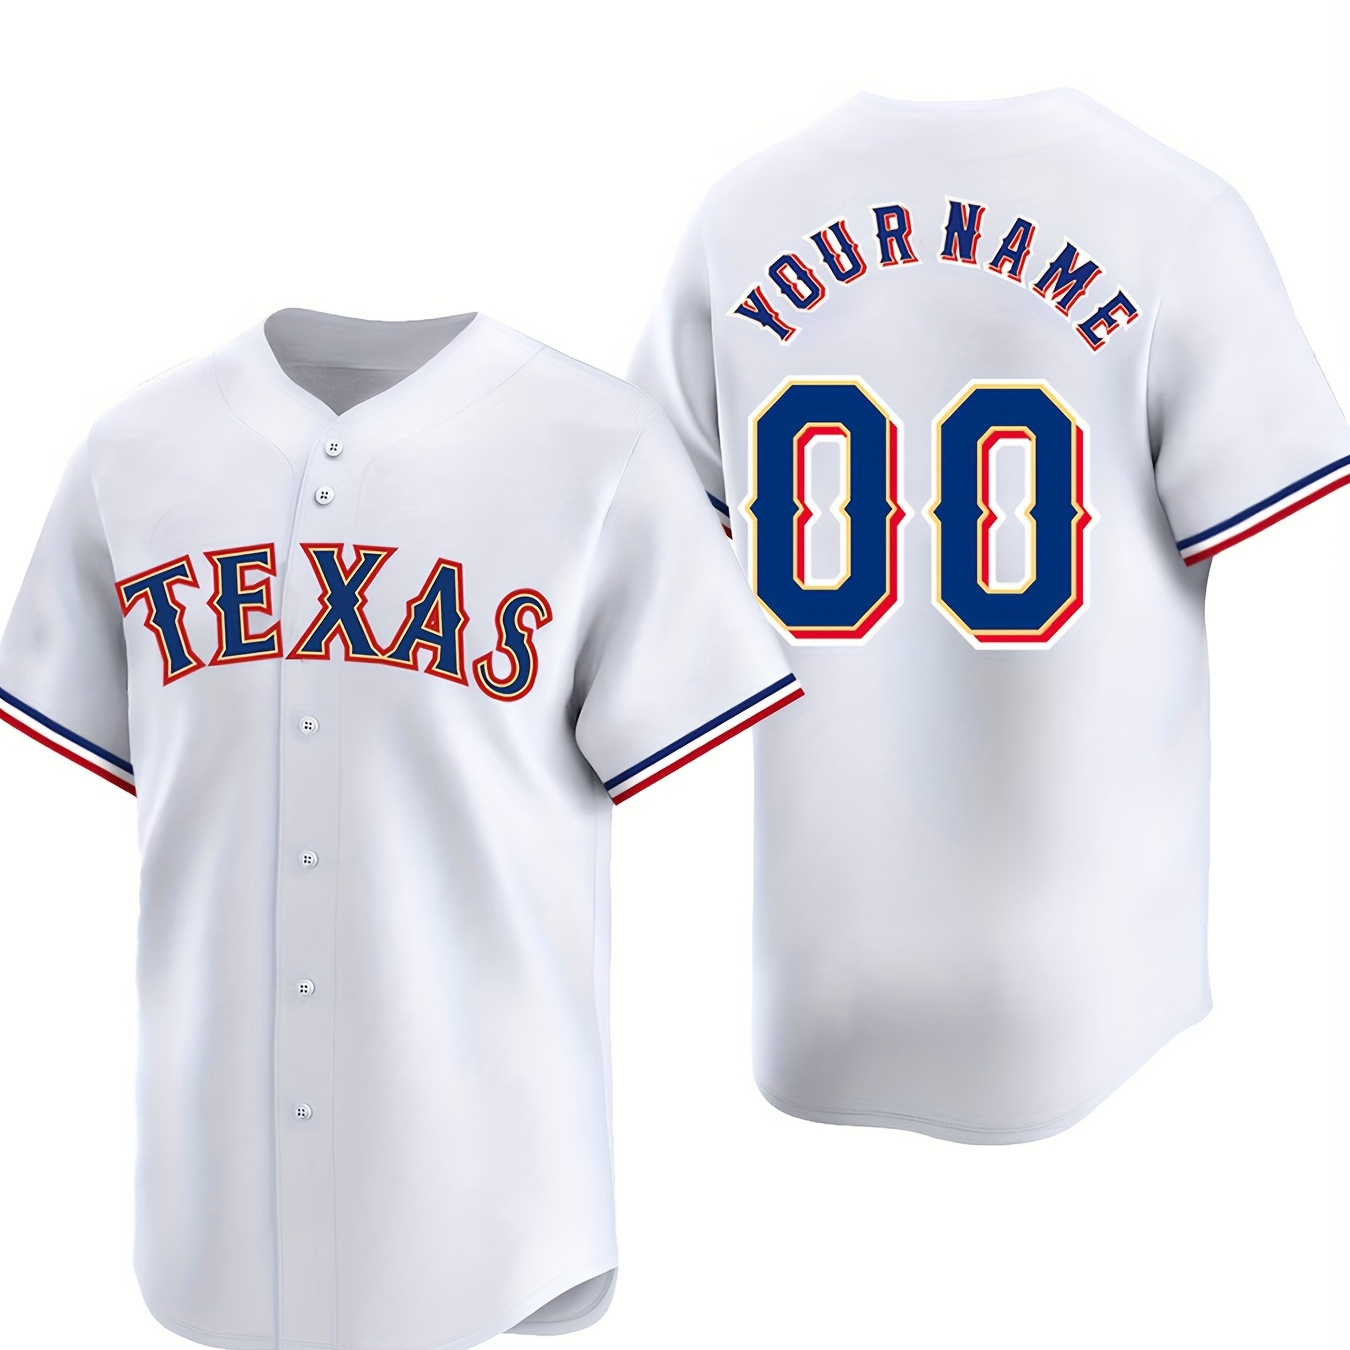 

Men's Personalized Custom Baseball Jersey Shirt, Your Diy Name Numbers & Texas Graphic Print Short Sleeve Button Up Shirt For Competition Party Training